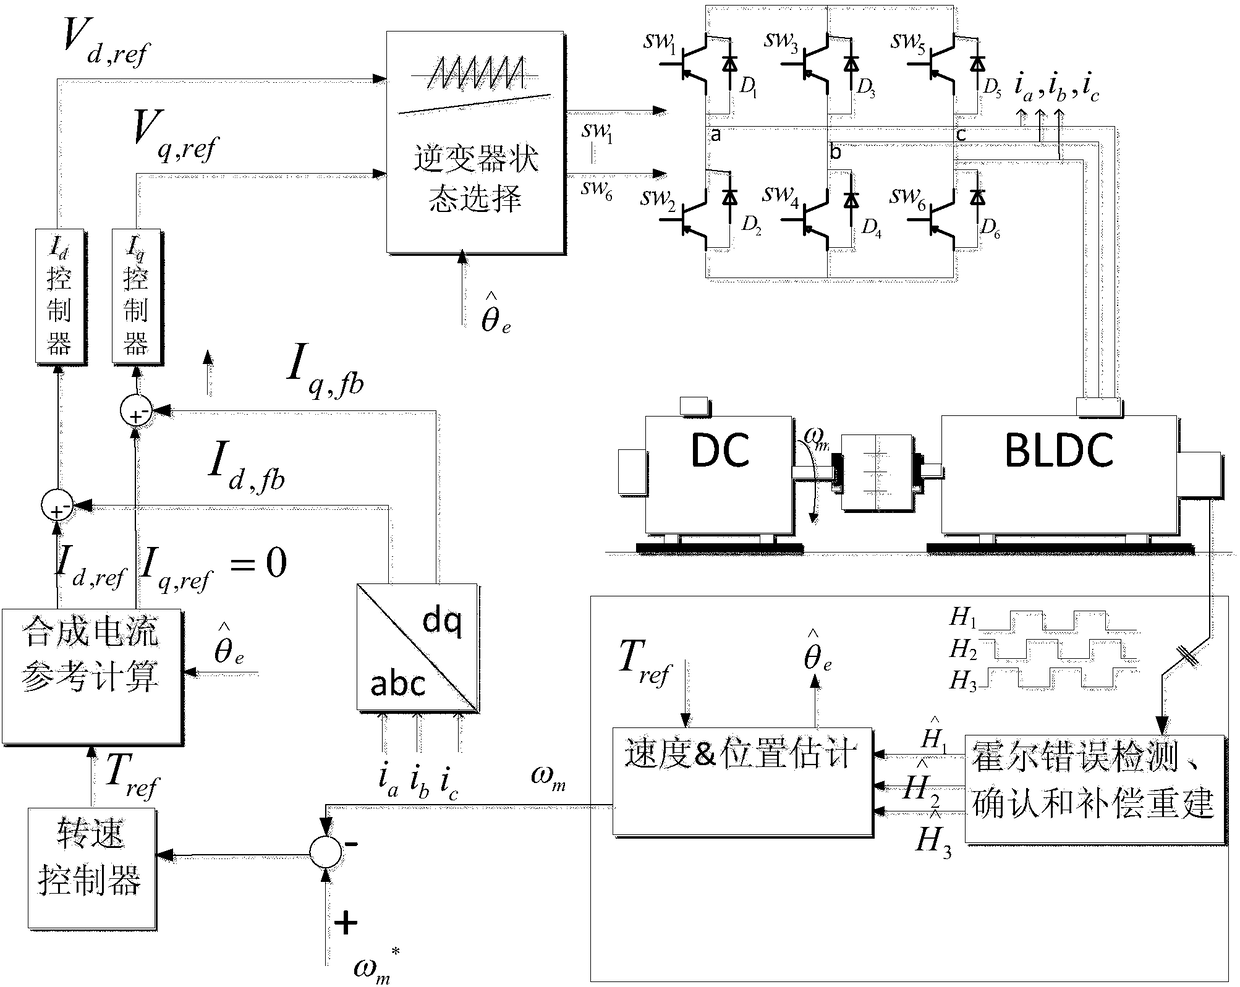 Hall Fault Tolerant Control Method for Low Torque Ripple of Permanent Magnet Brushless DC Motor